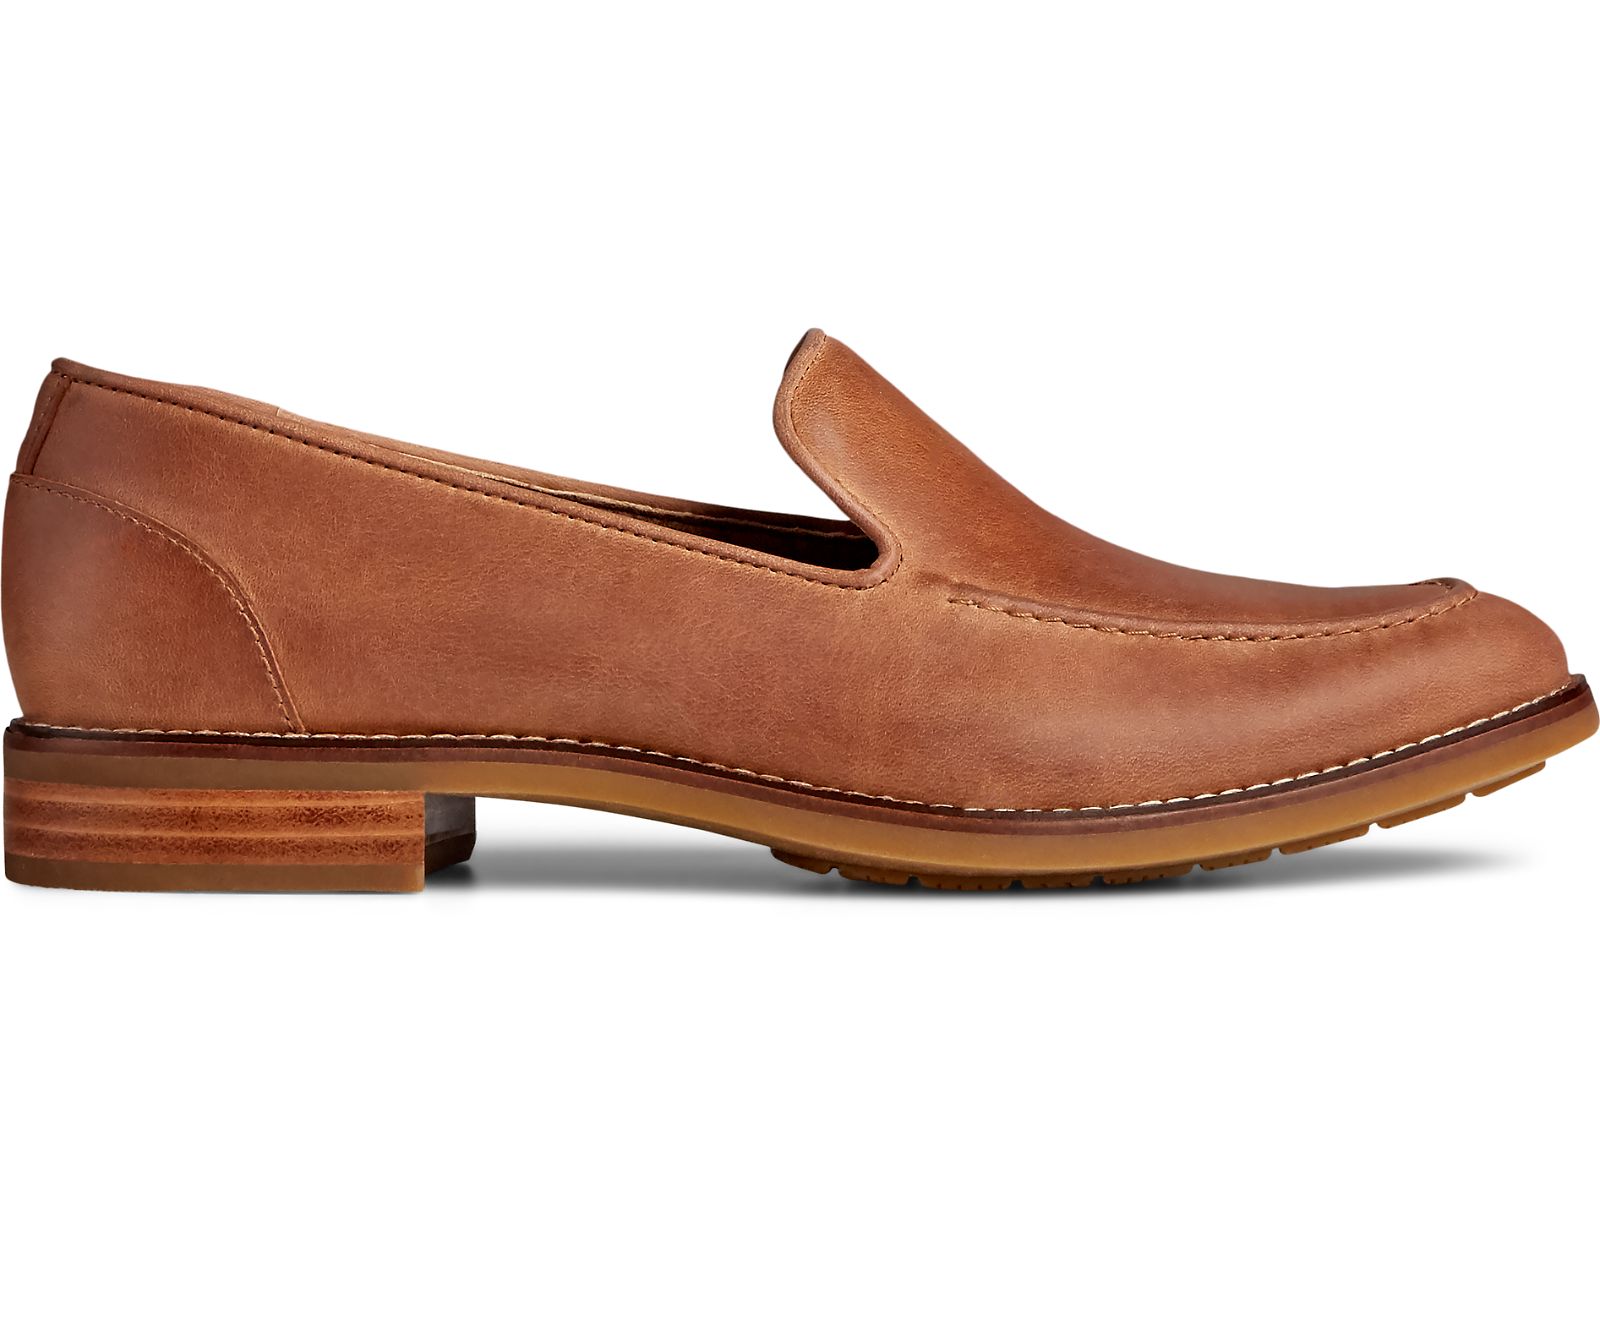 Women's Fairpoint Leather Loafer - Tan